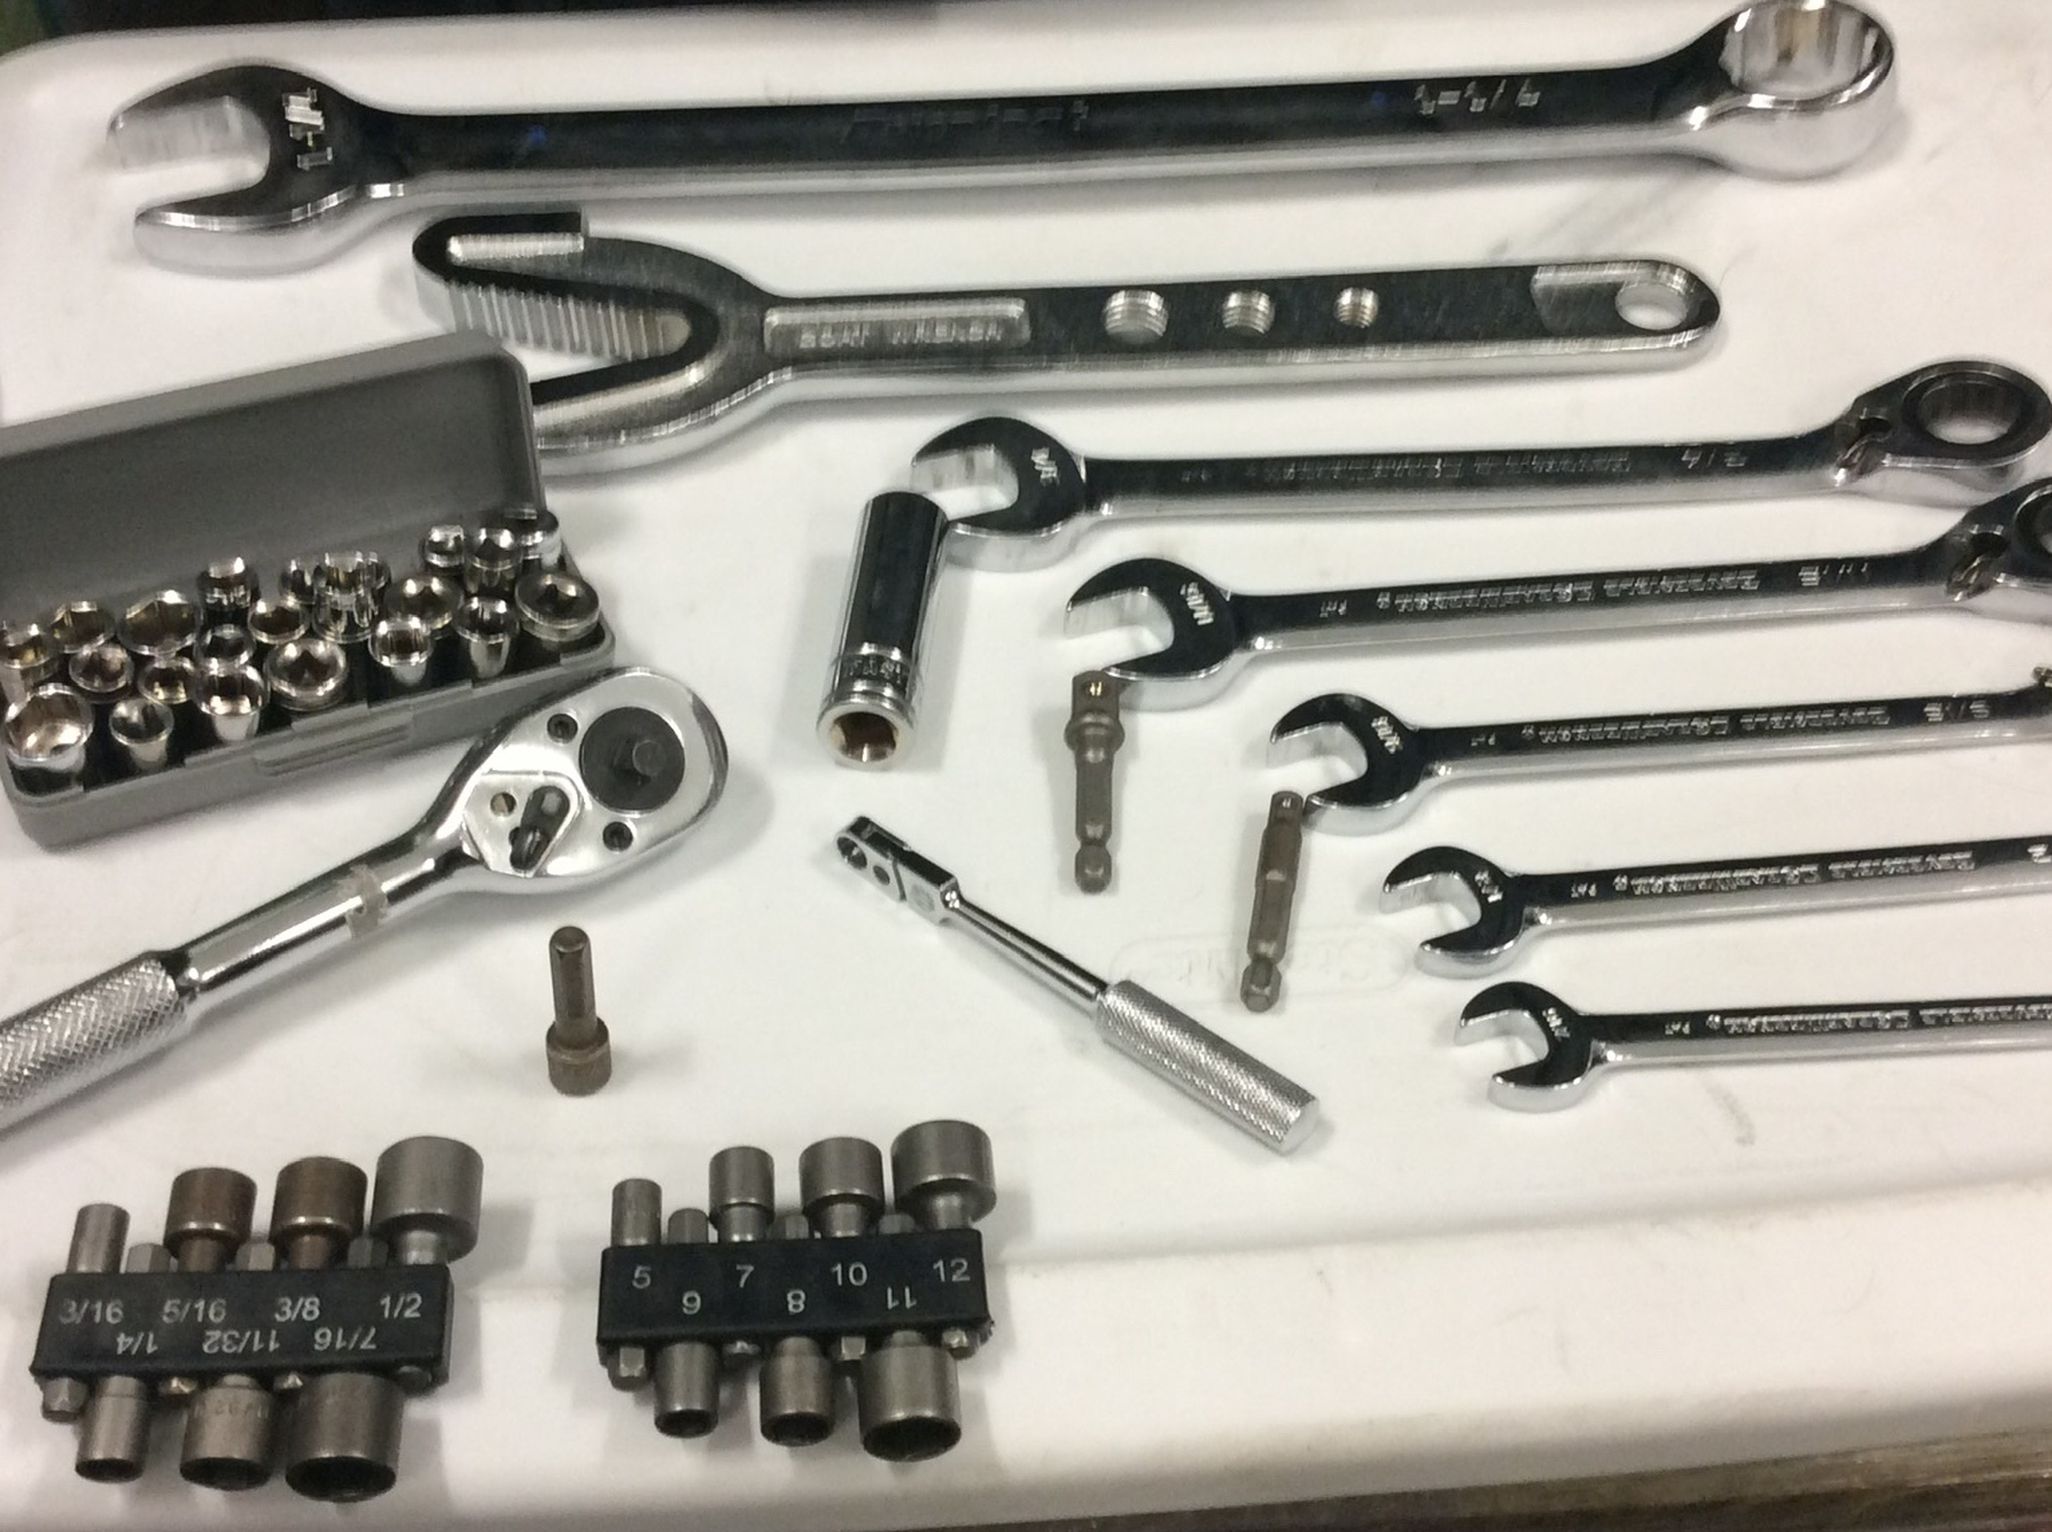 Gear wrench Ratchet Wrenches, Sockets And goat Wrench